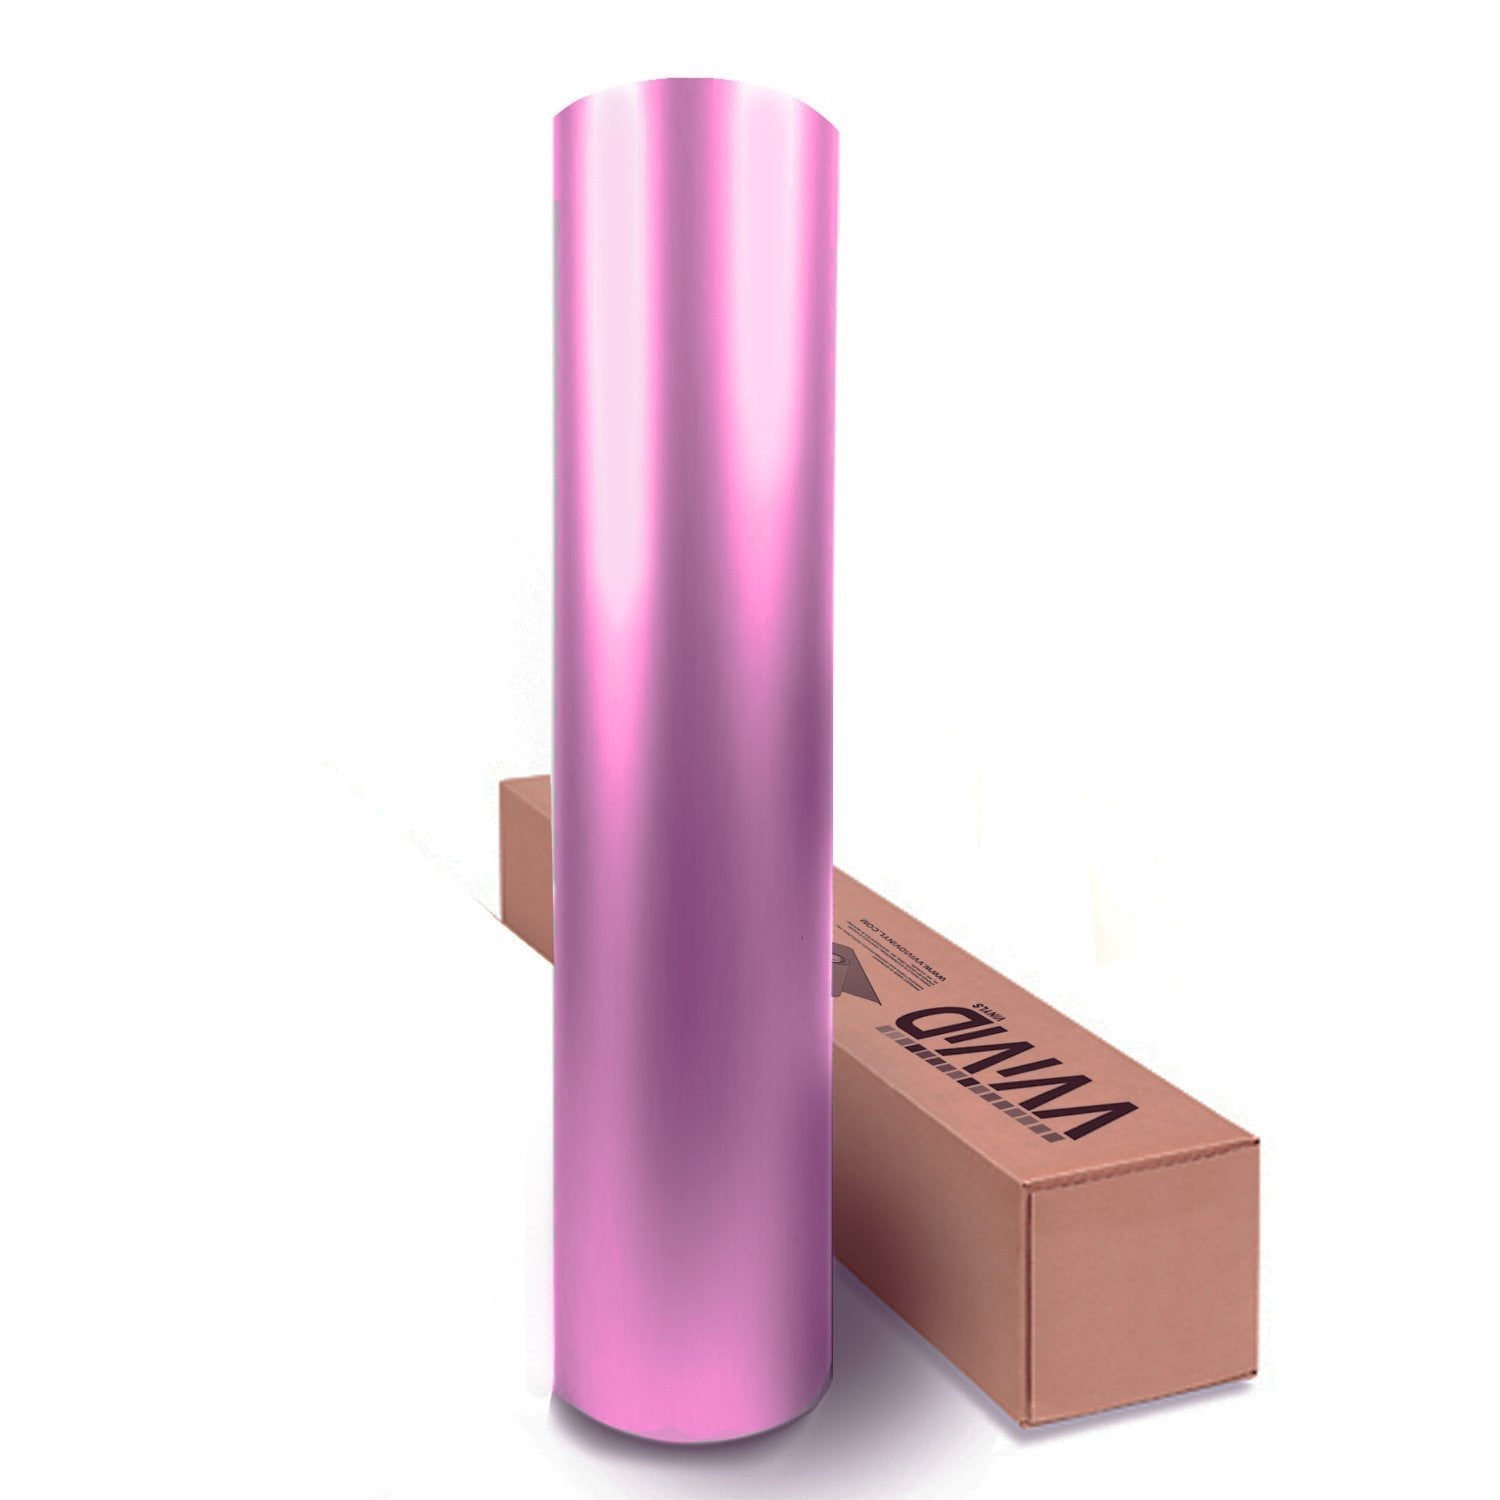 Matte Pink Vinyl Wrap Roll with VViViD XPO Air Release Technology - 2ft x 5ft